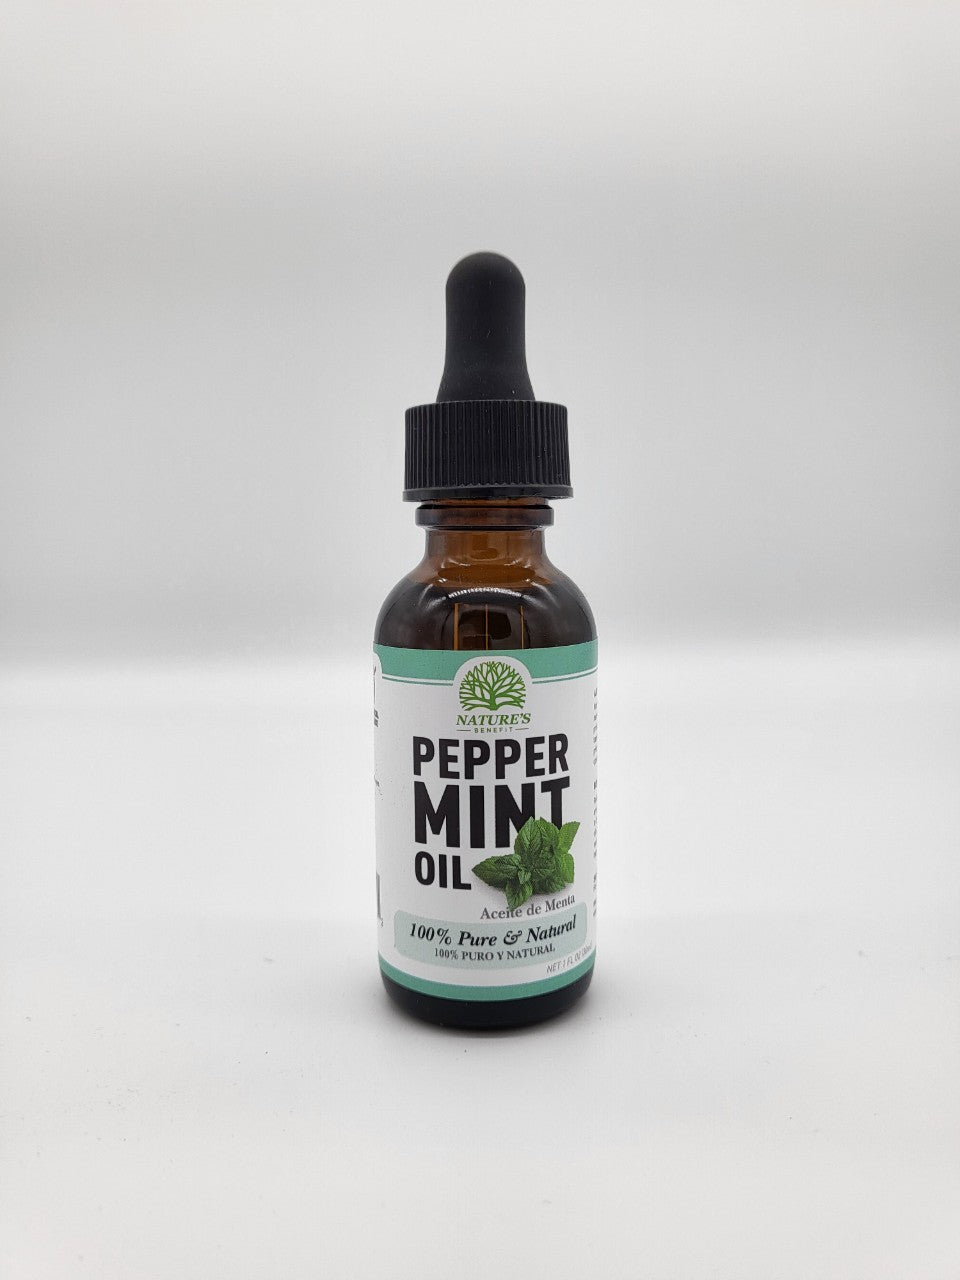 NATURE'S 100% PURE PEPPERMINT OIL